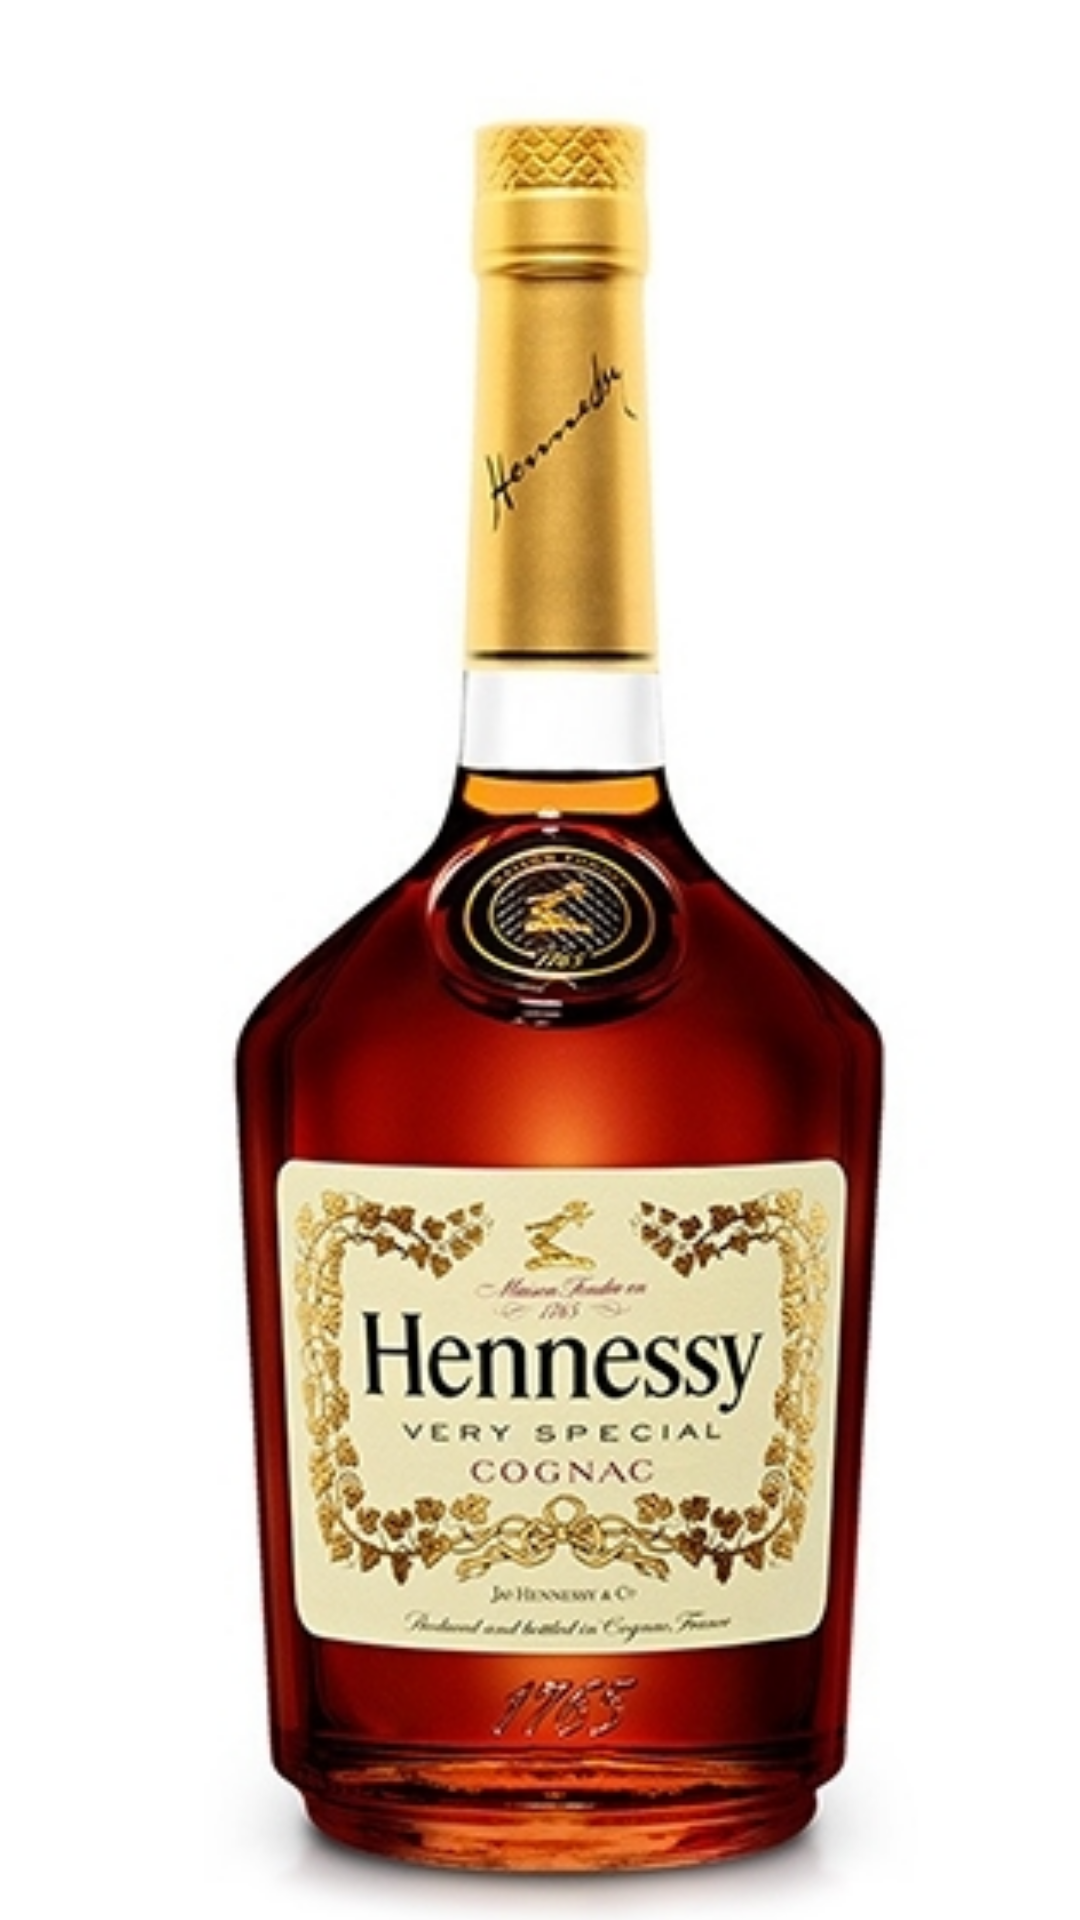 Hennessy, Product categories